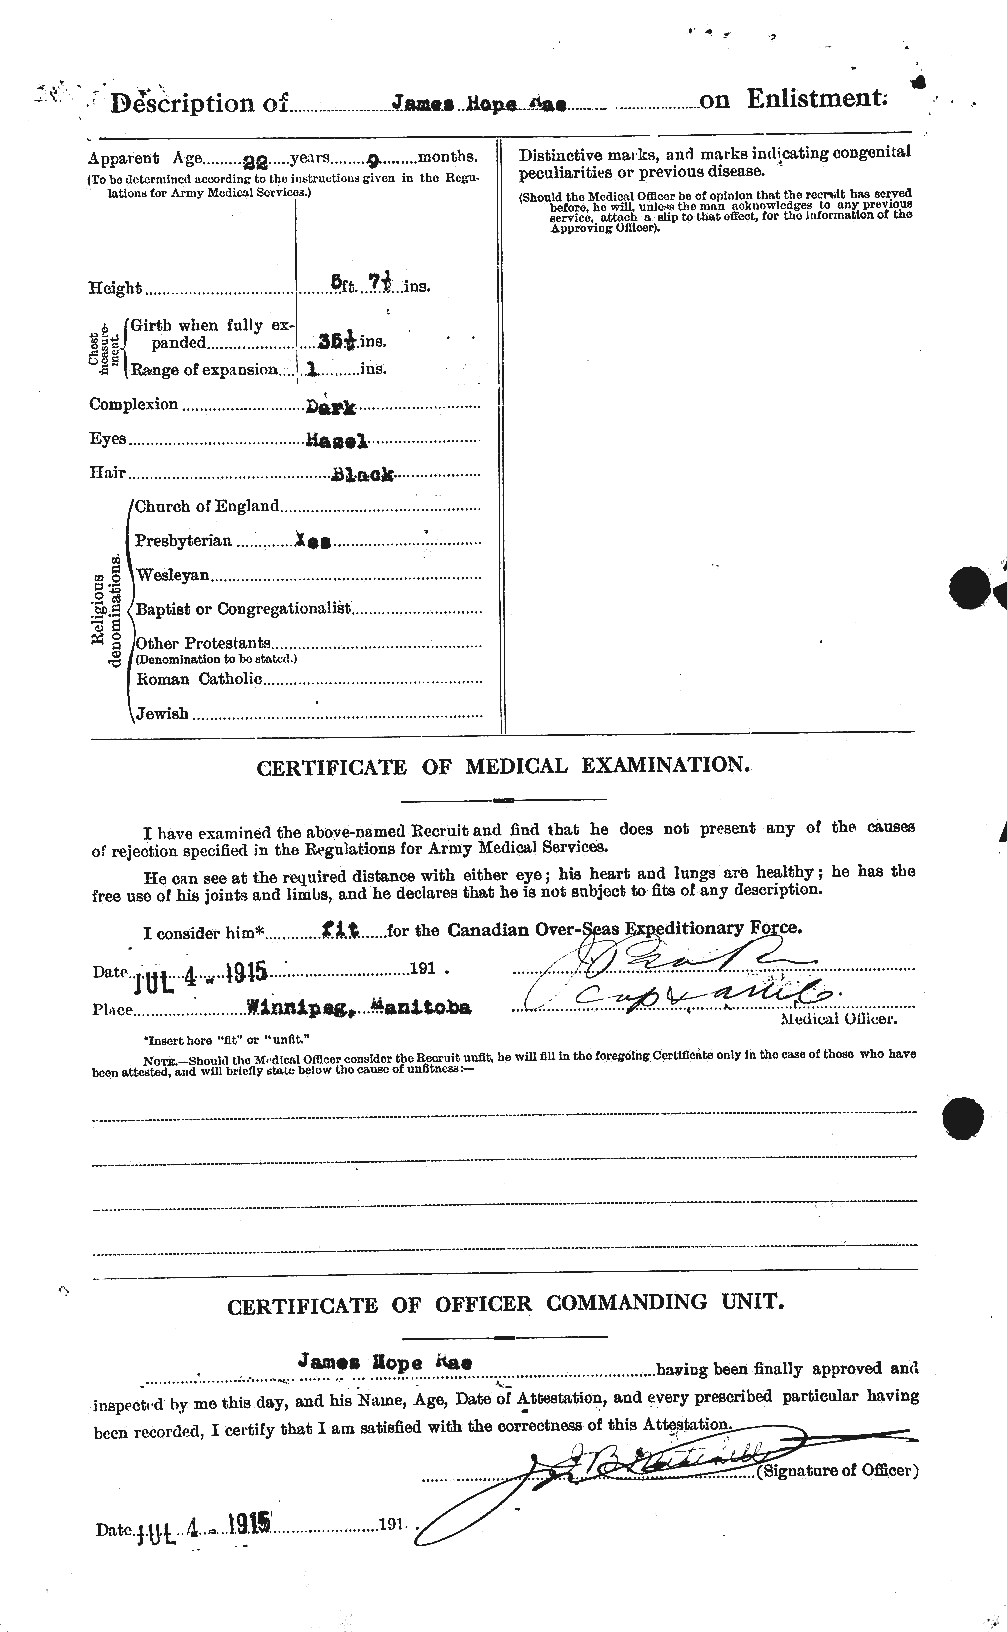 Personnel Records of the First World War - CEF 591244b